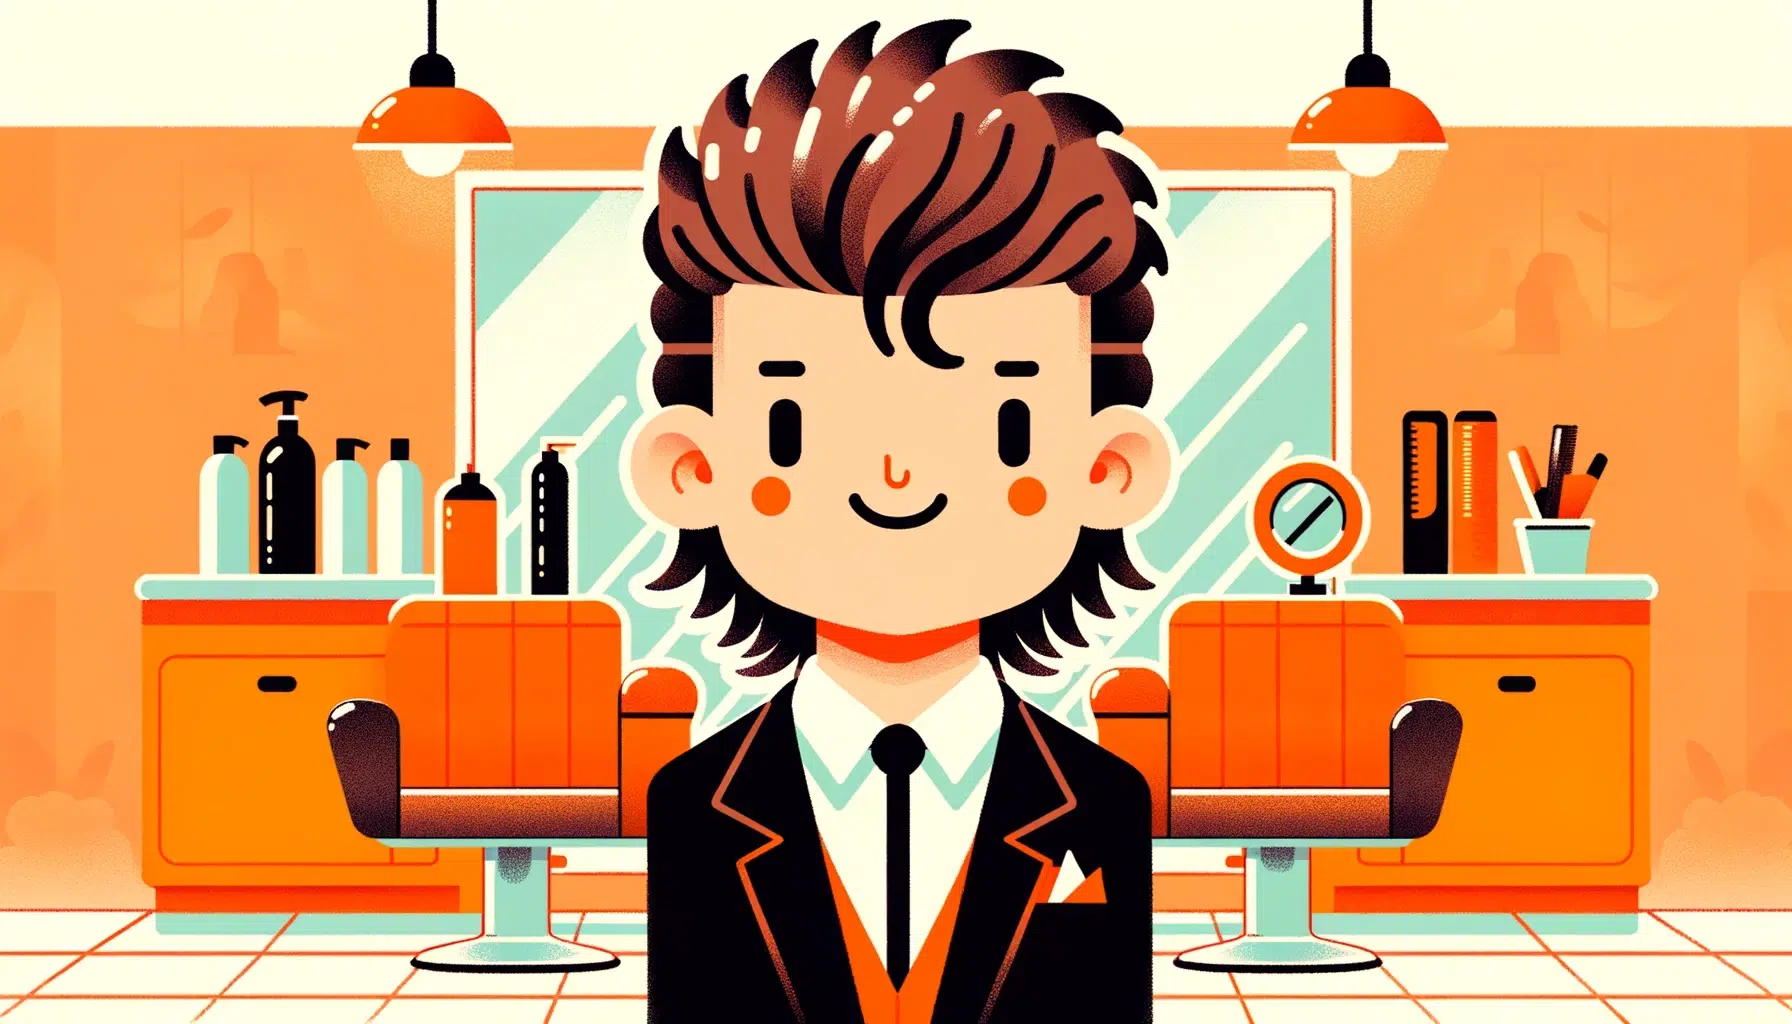 illustration of a stylized character with a short mullet haircut, standing inside a hair salon.